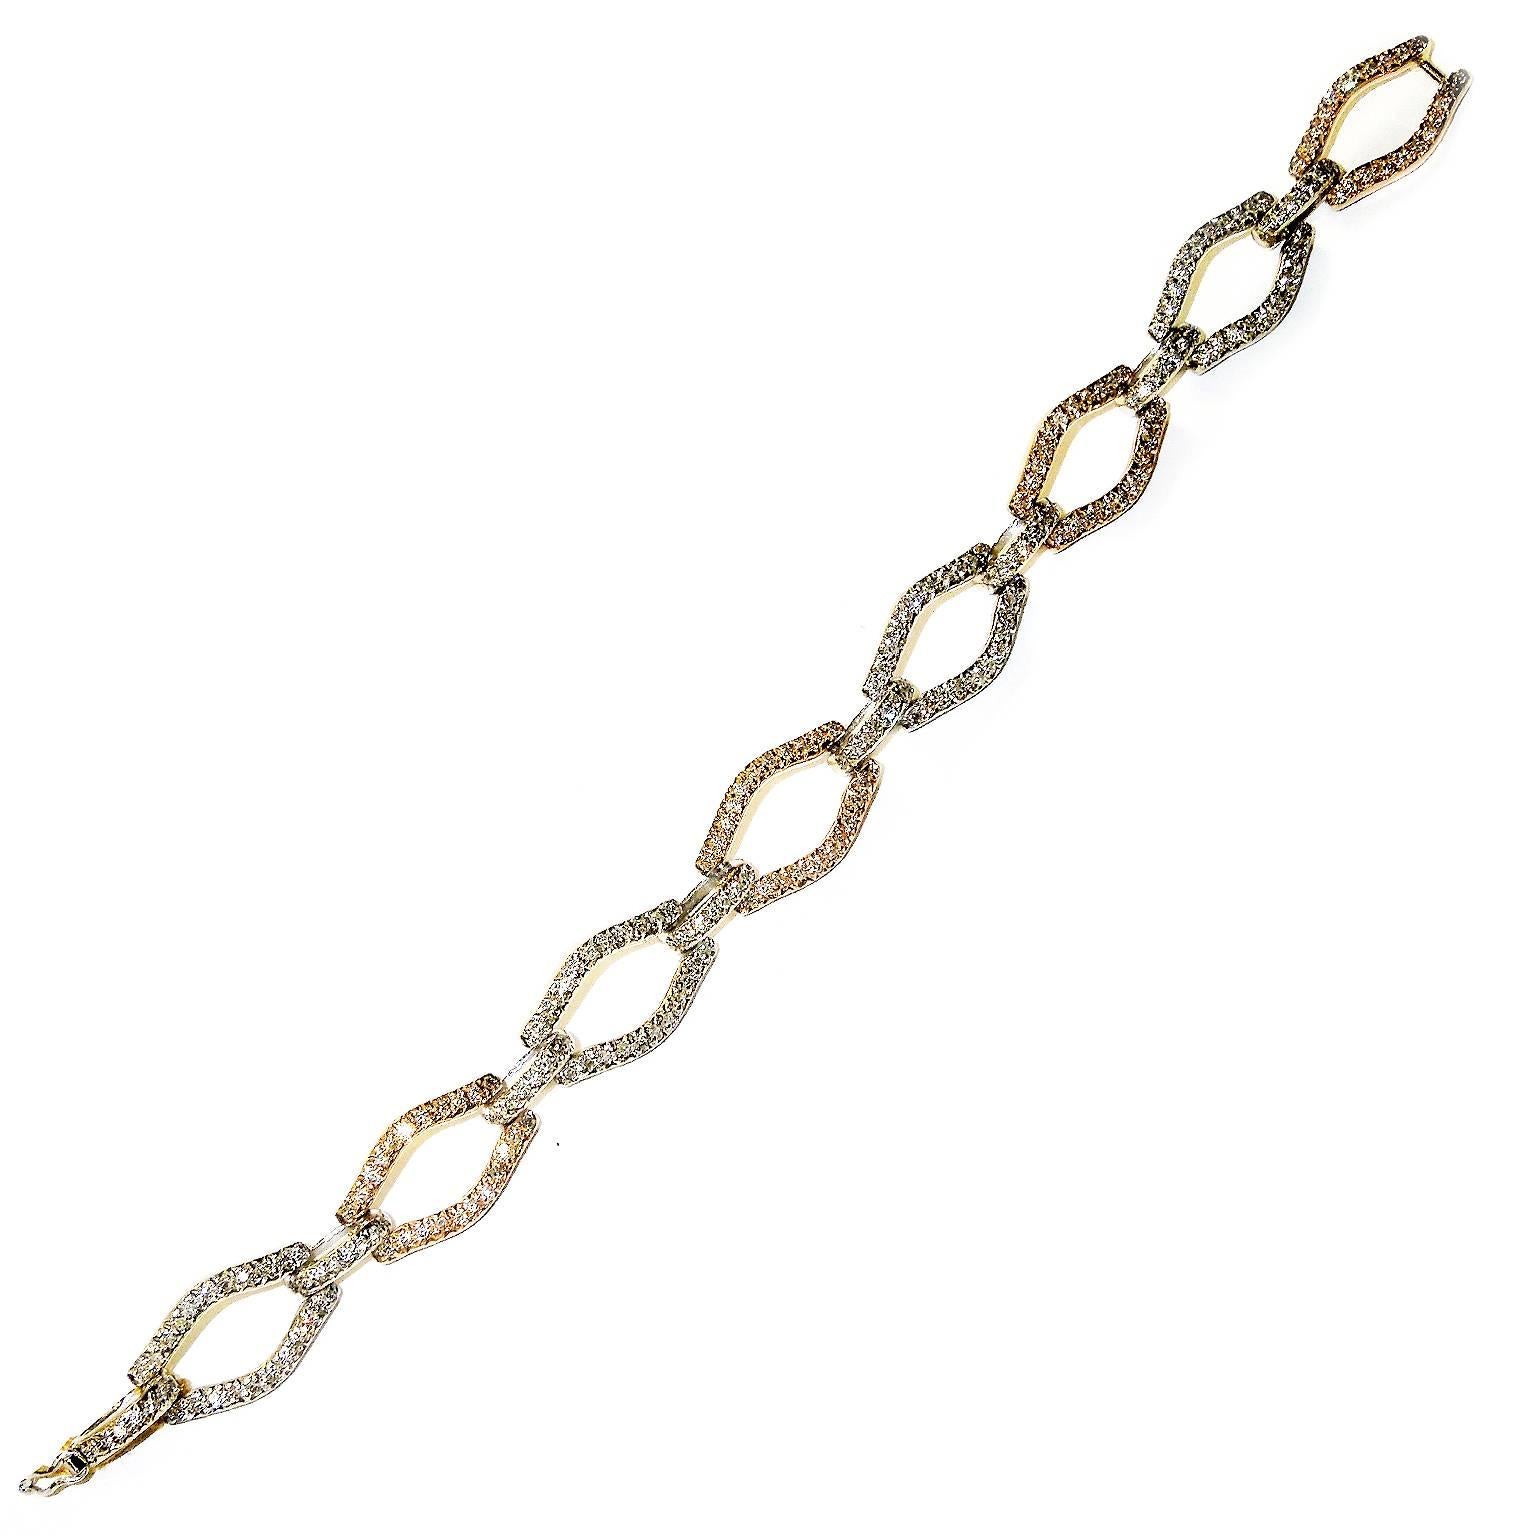 18K White and Rose Gold Bracelet with Diamonds

4.75ct. Diamonds

27.7 grams 18K Gold

7.5 inches length. 0.40 inches width

Estate
